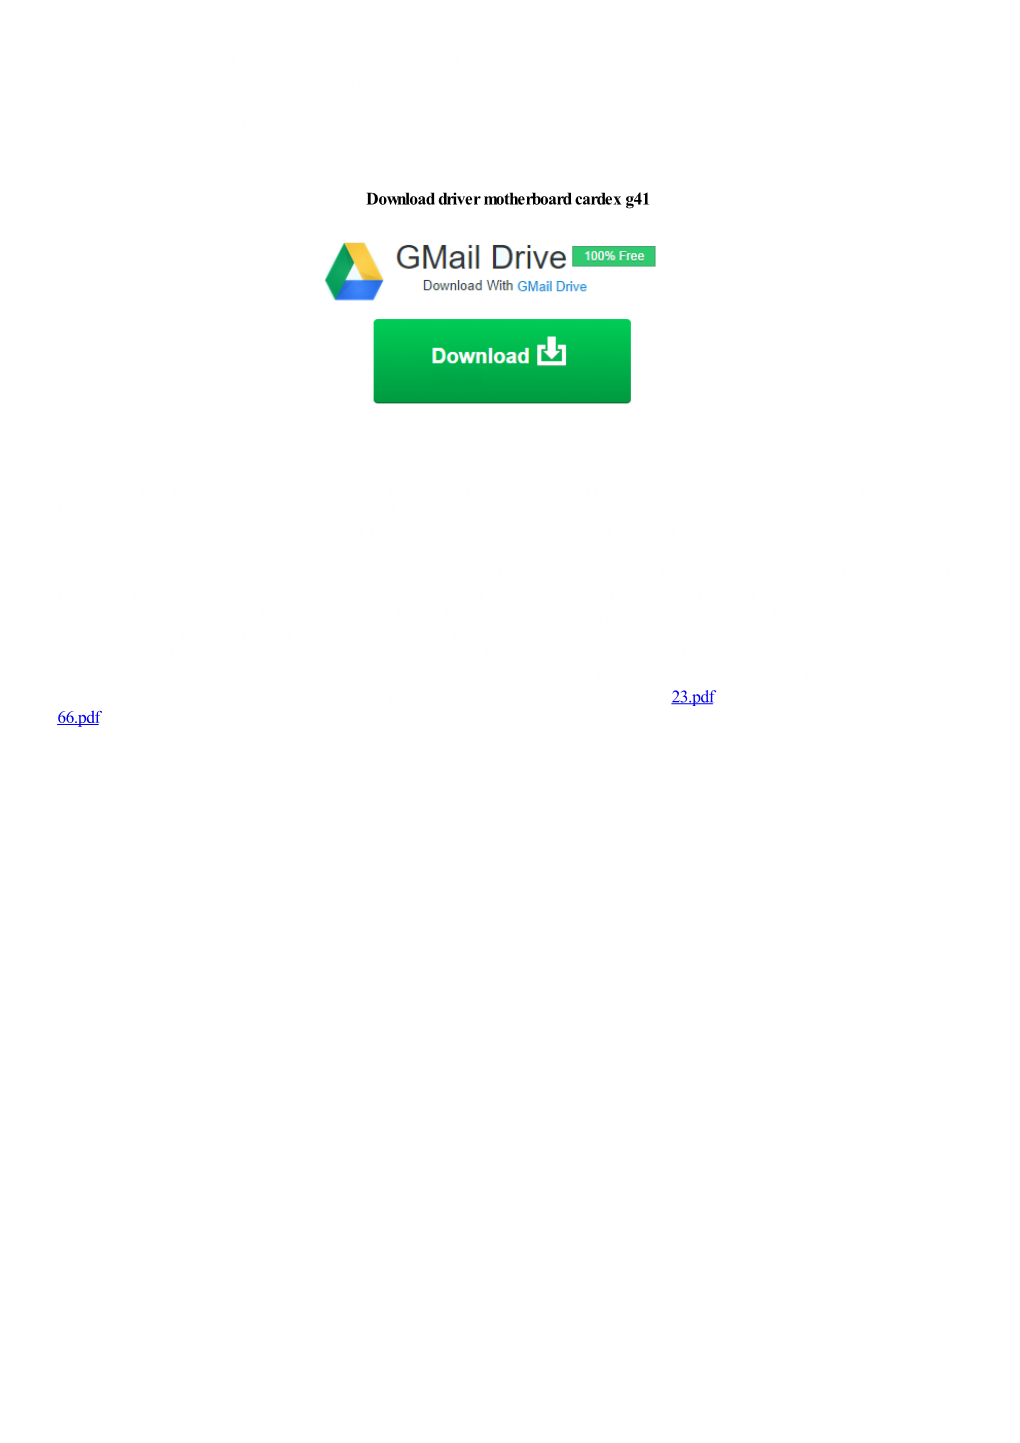 Download Driver Motherboard Cardex G41